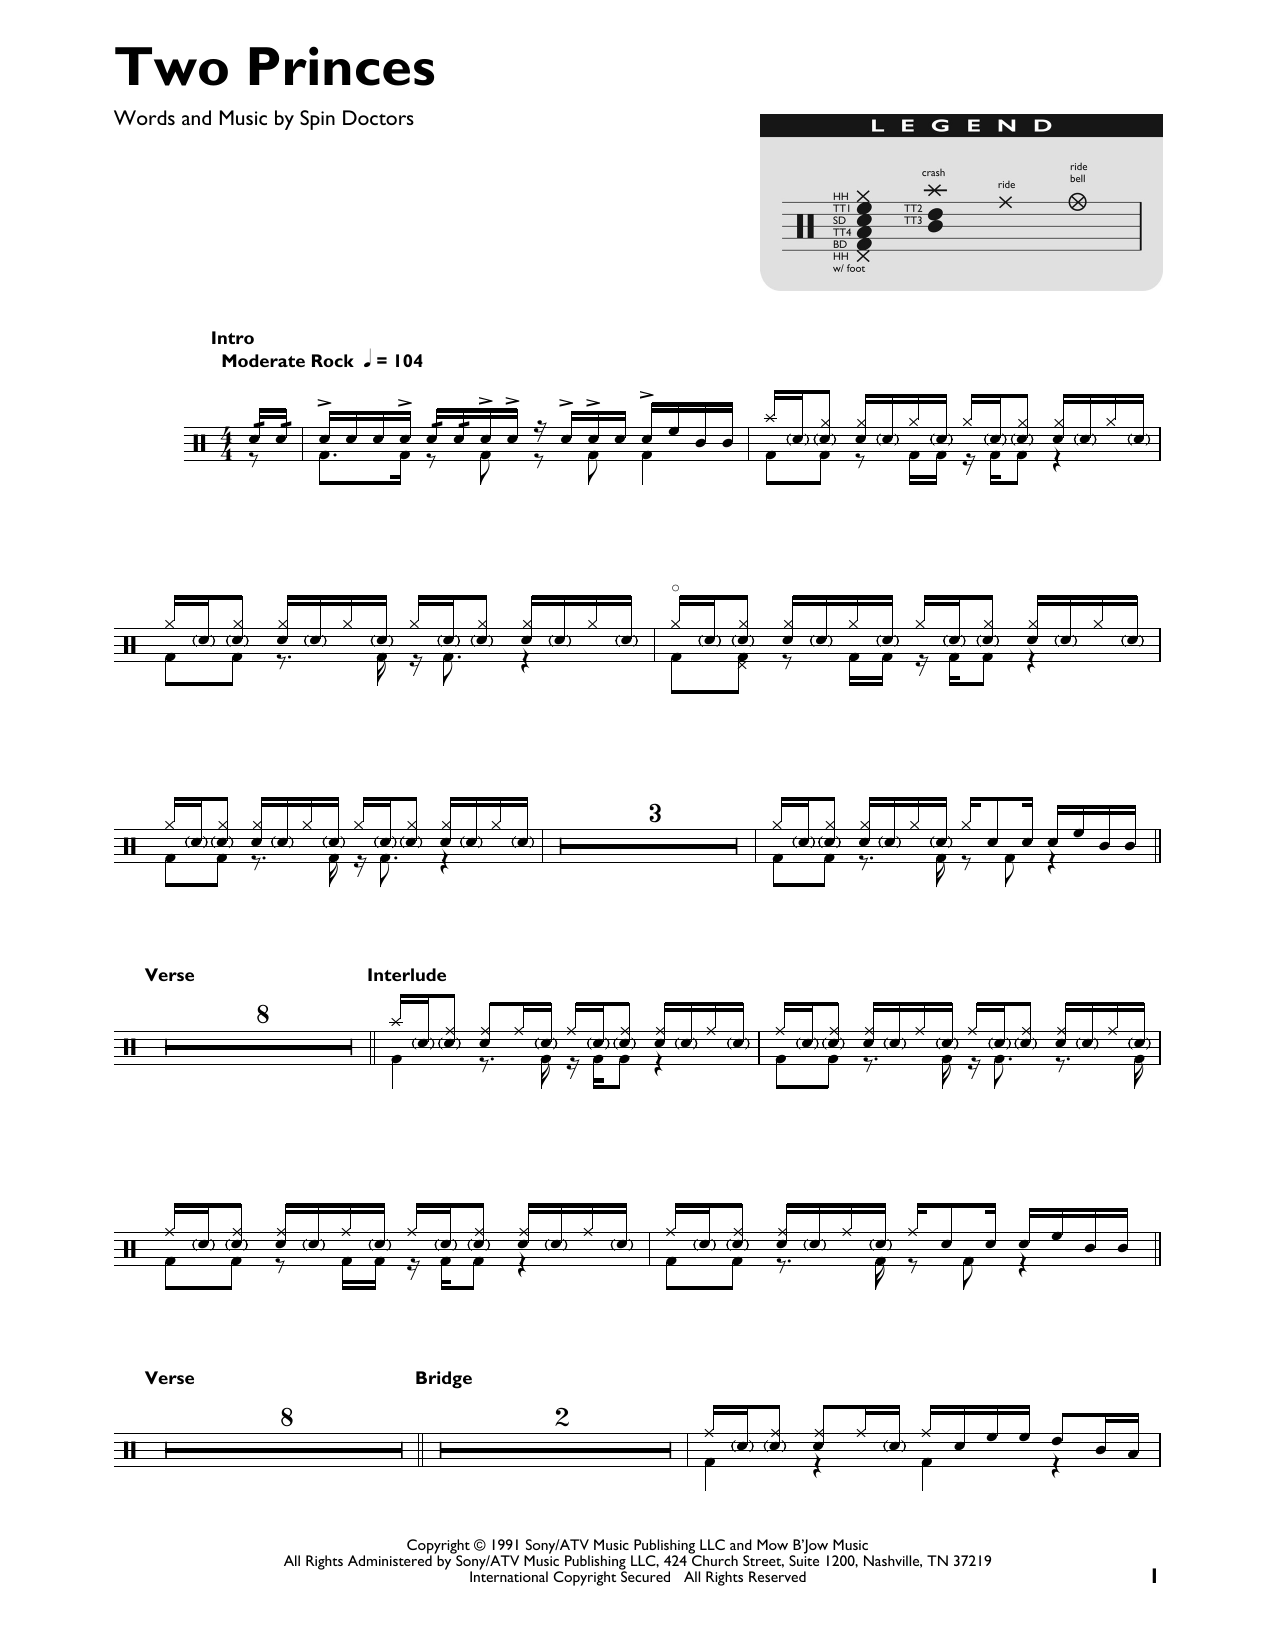 Download Spin Doctors Two Princes Sheet Music